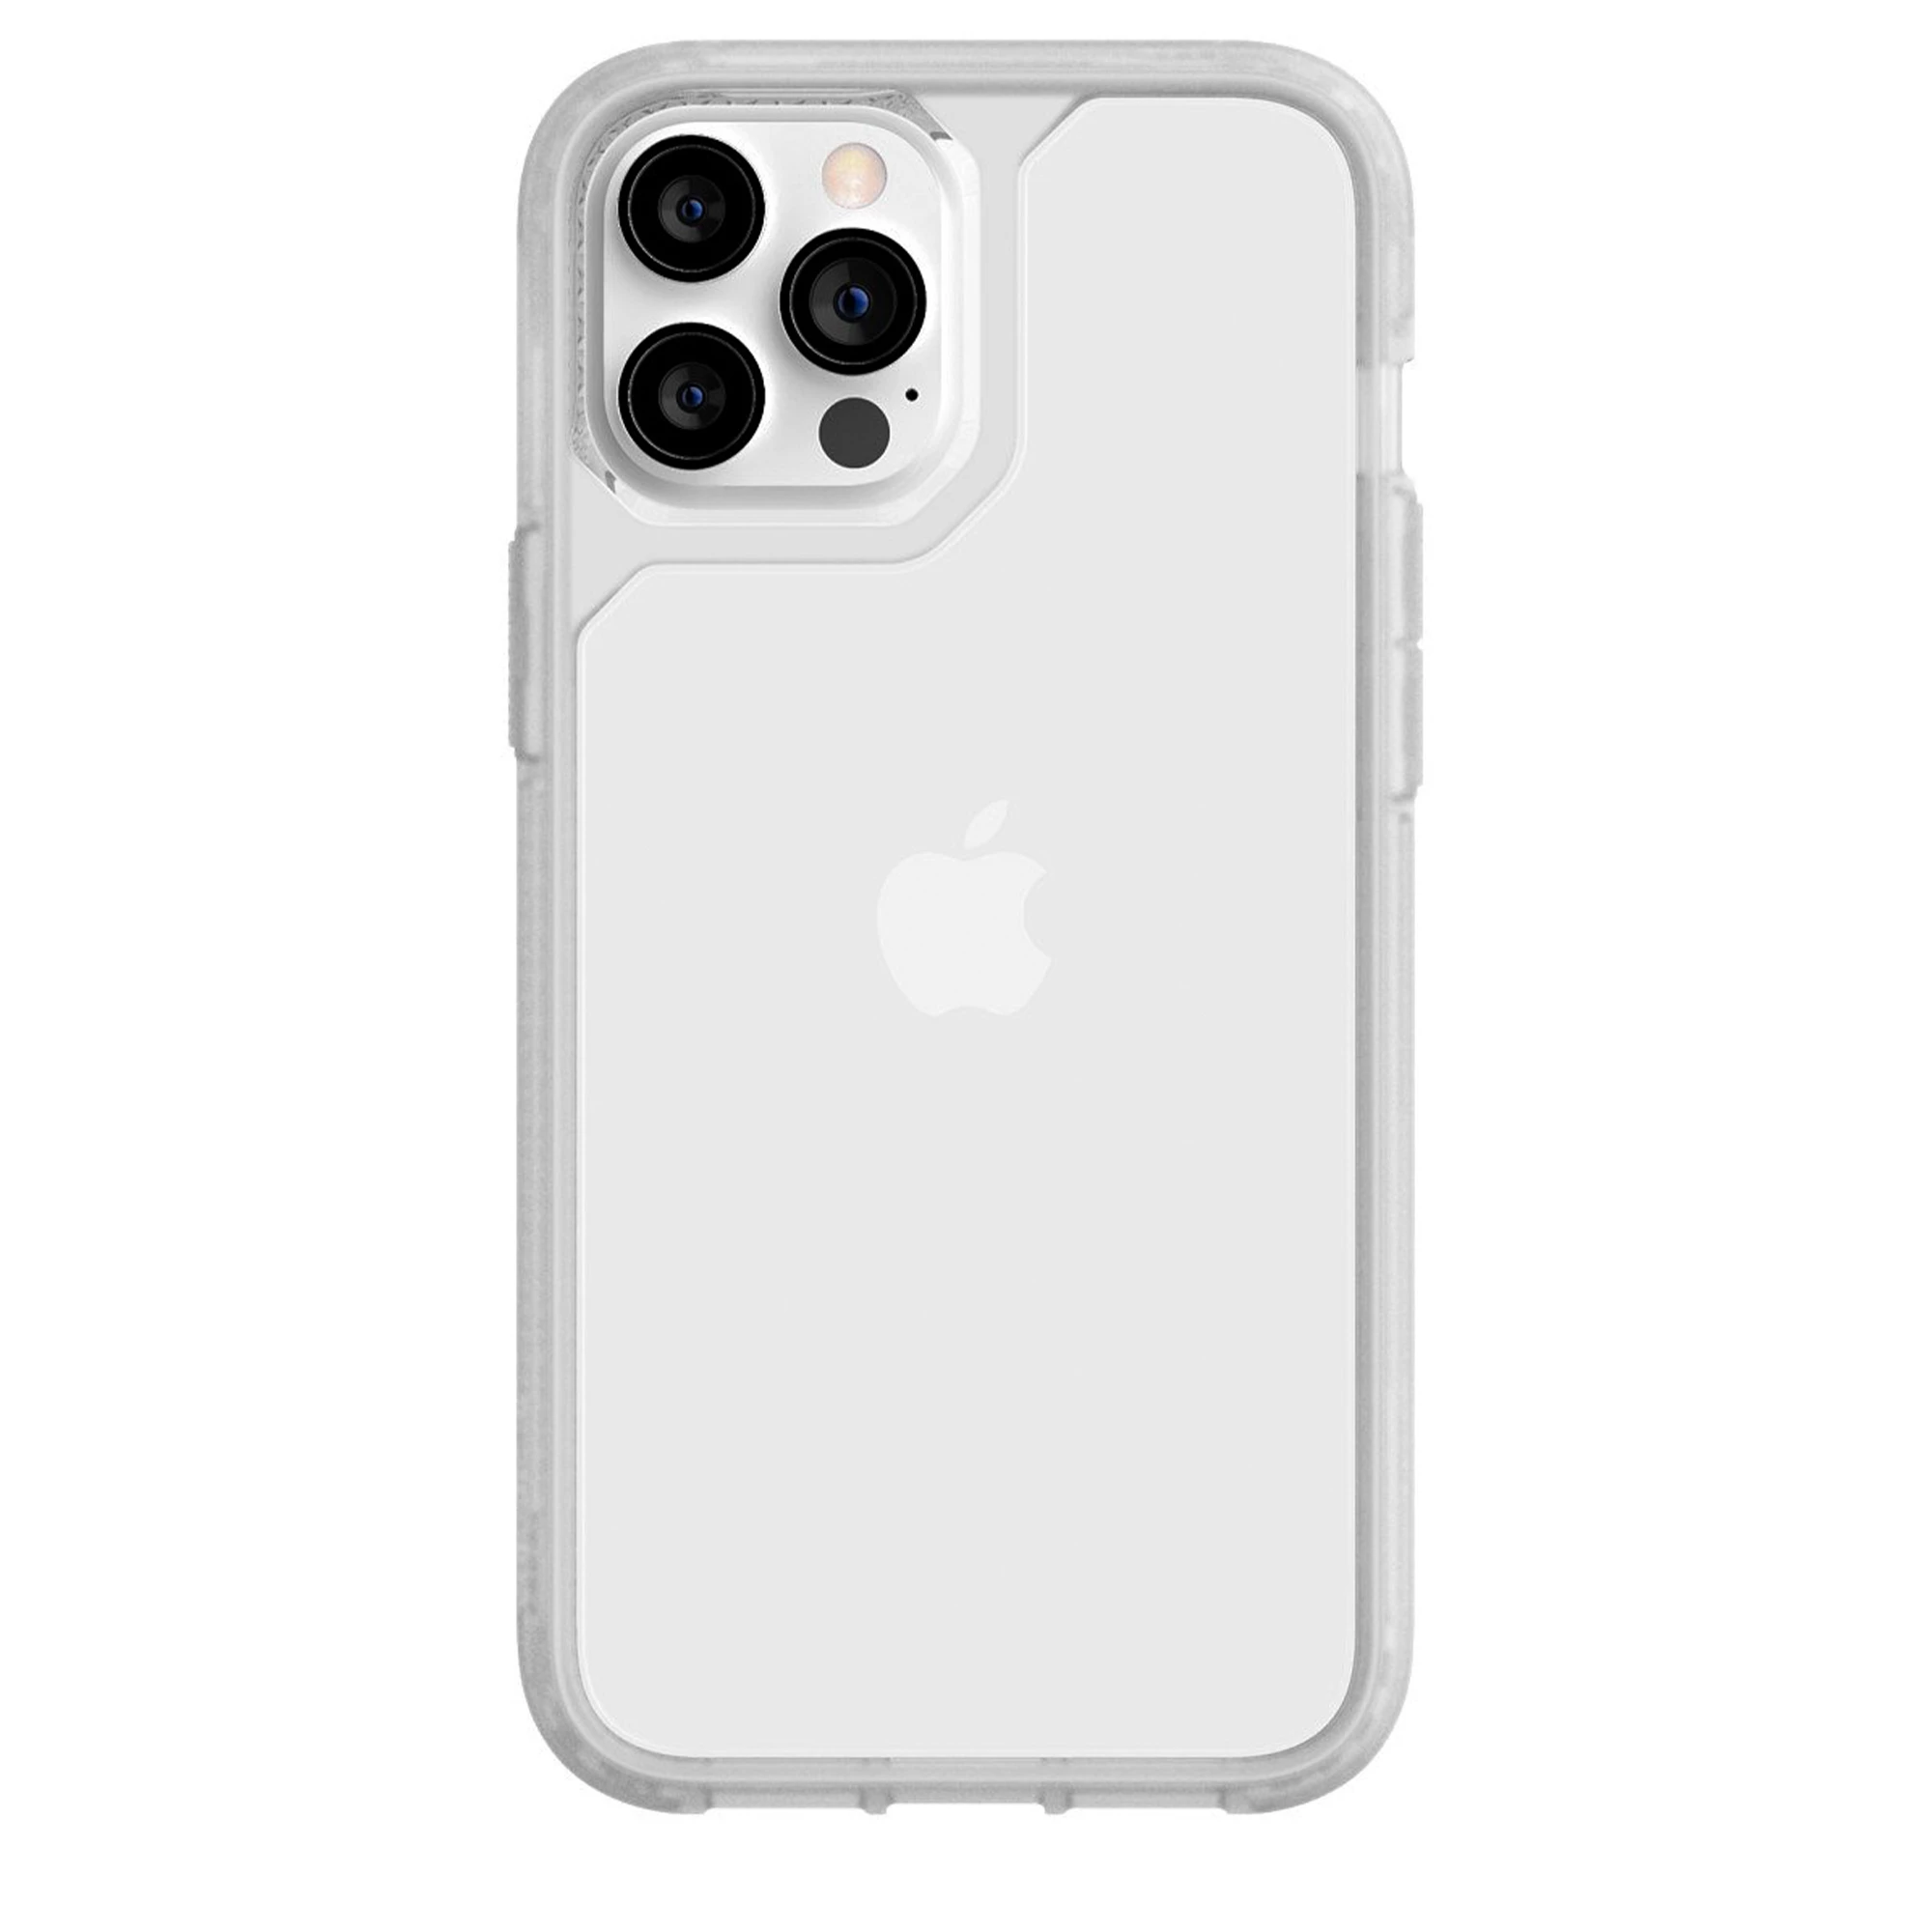 Griffin Survivor Strong for iPhone 12 Pro Max - Clear (GIP-053-CLR)